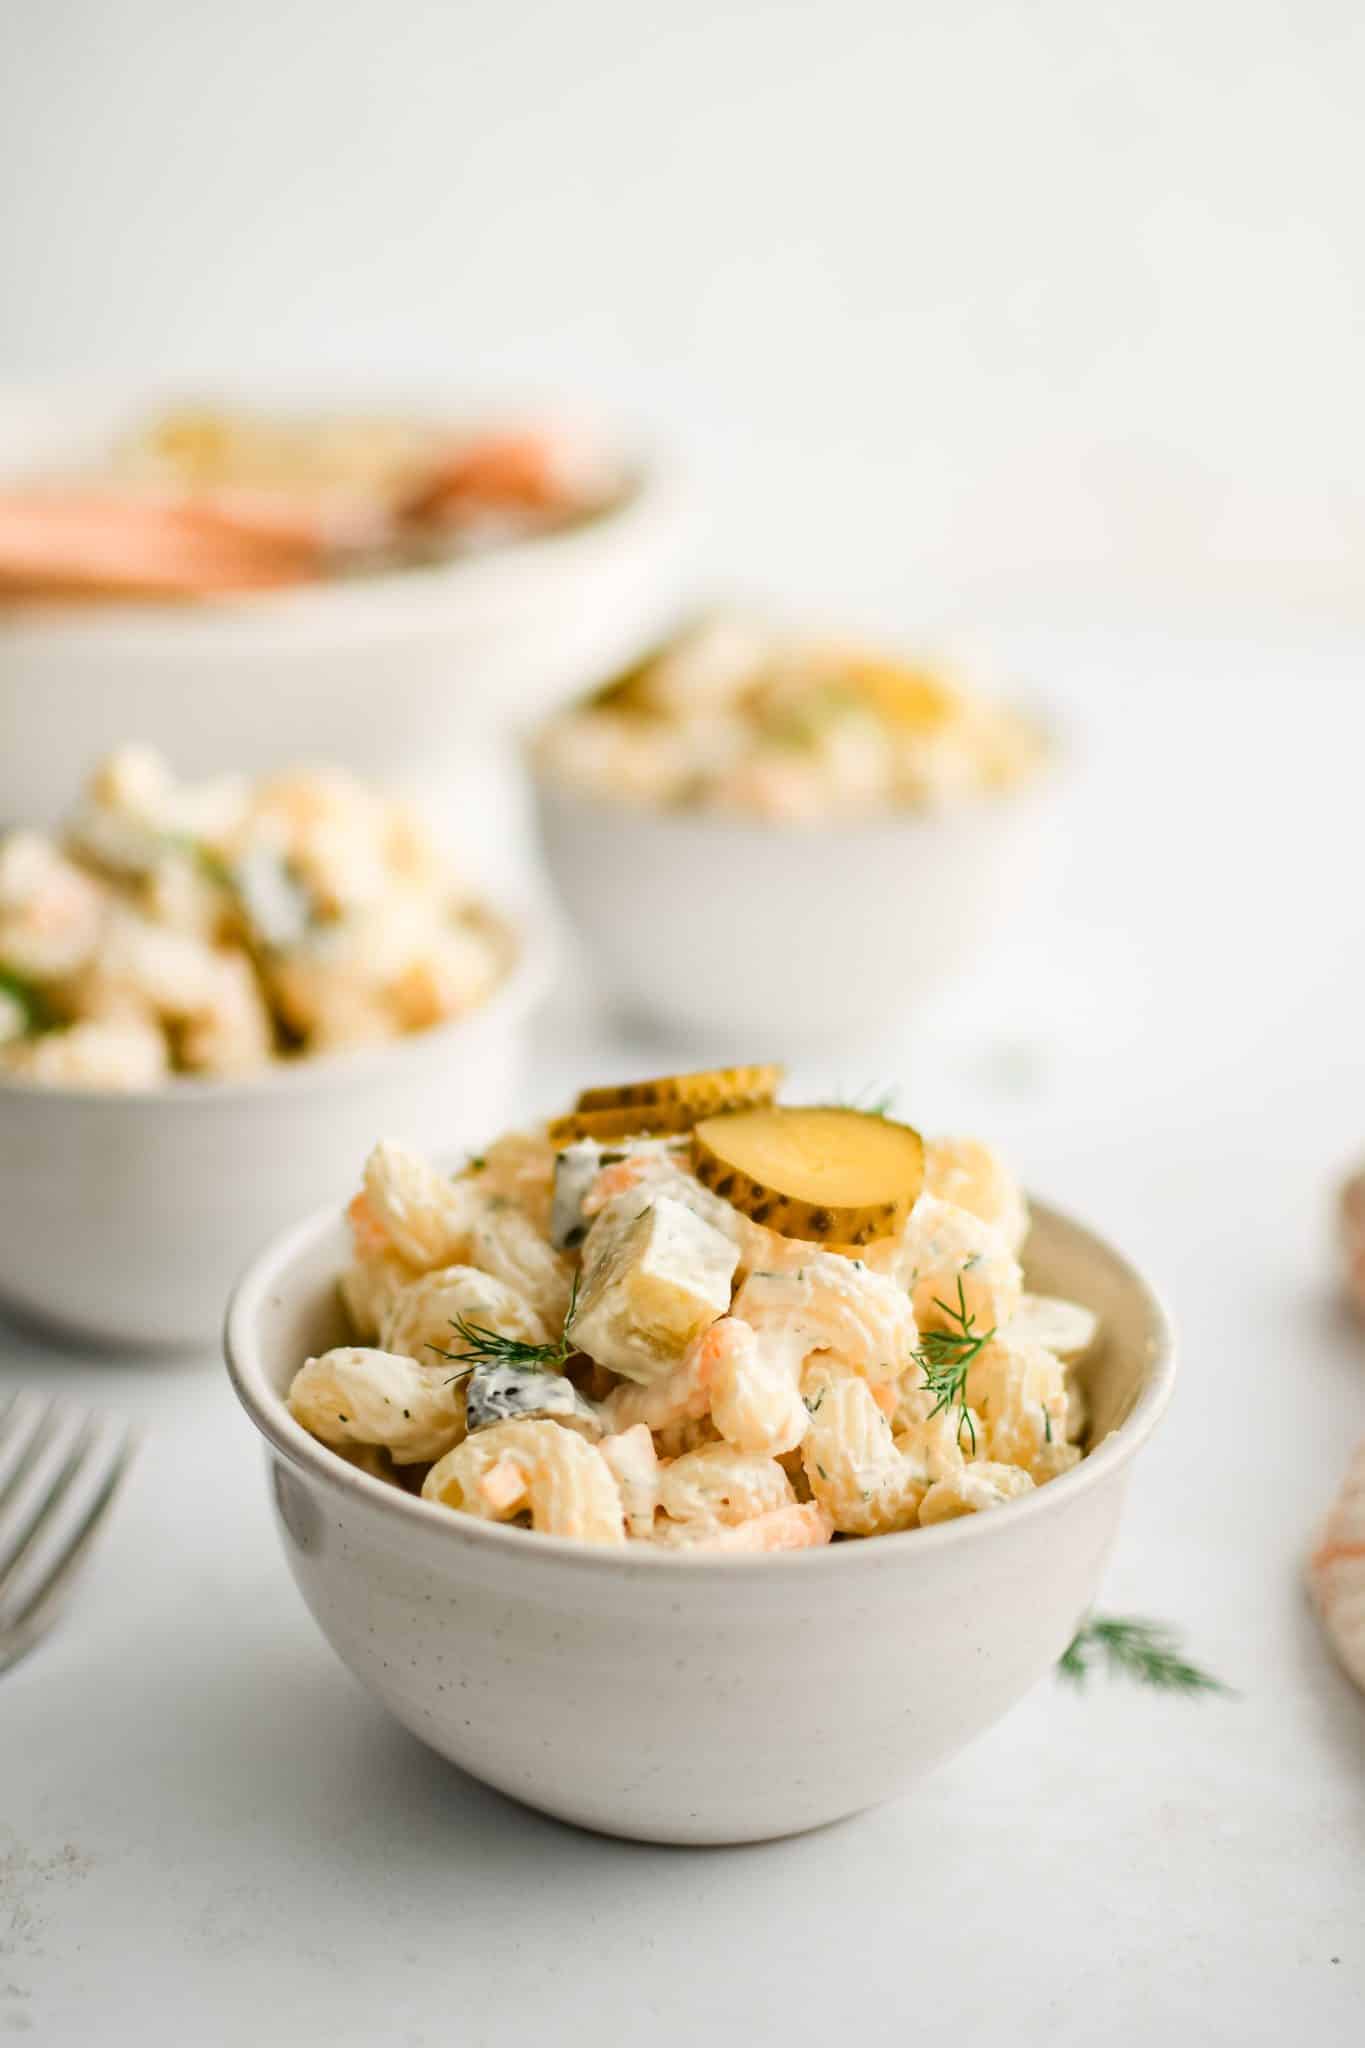 Small white serving bowls filled with creamy dill pickle pasta salad.